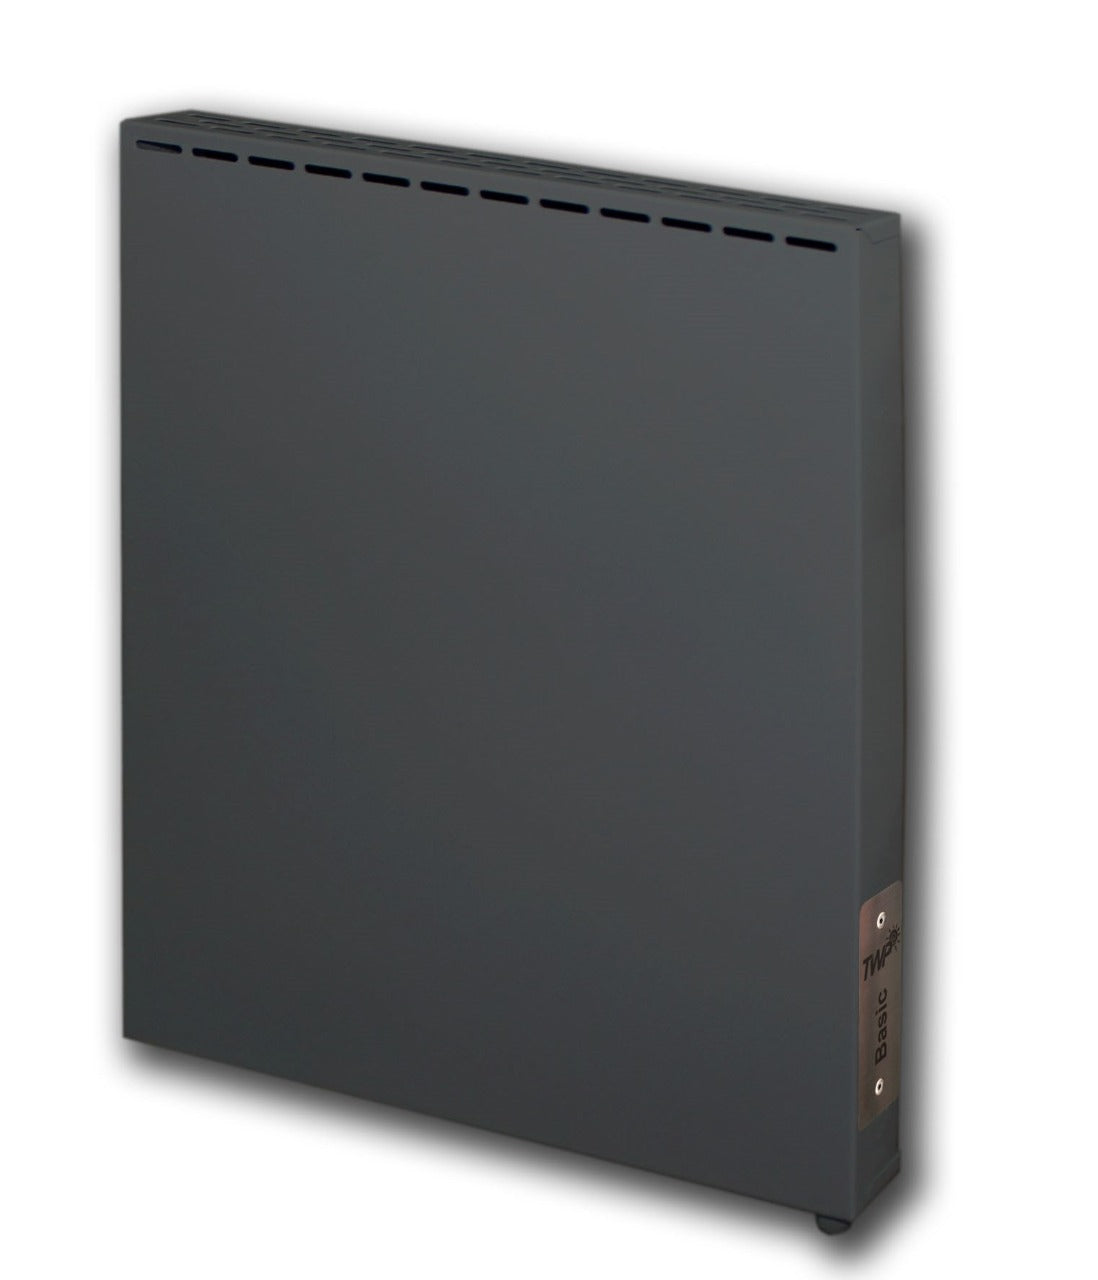 Infrared panel heater